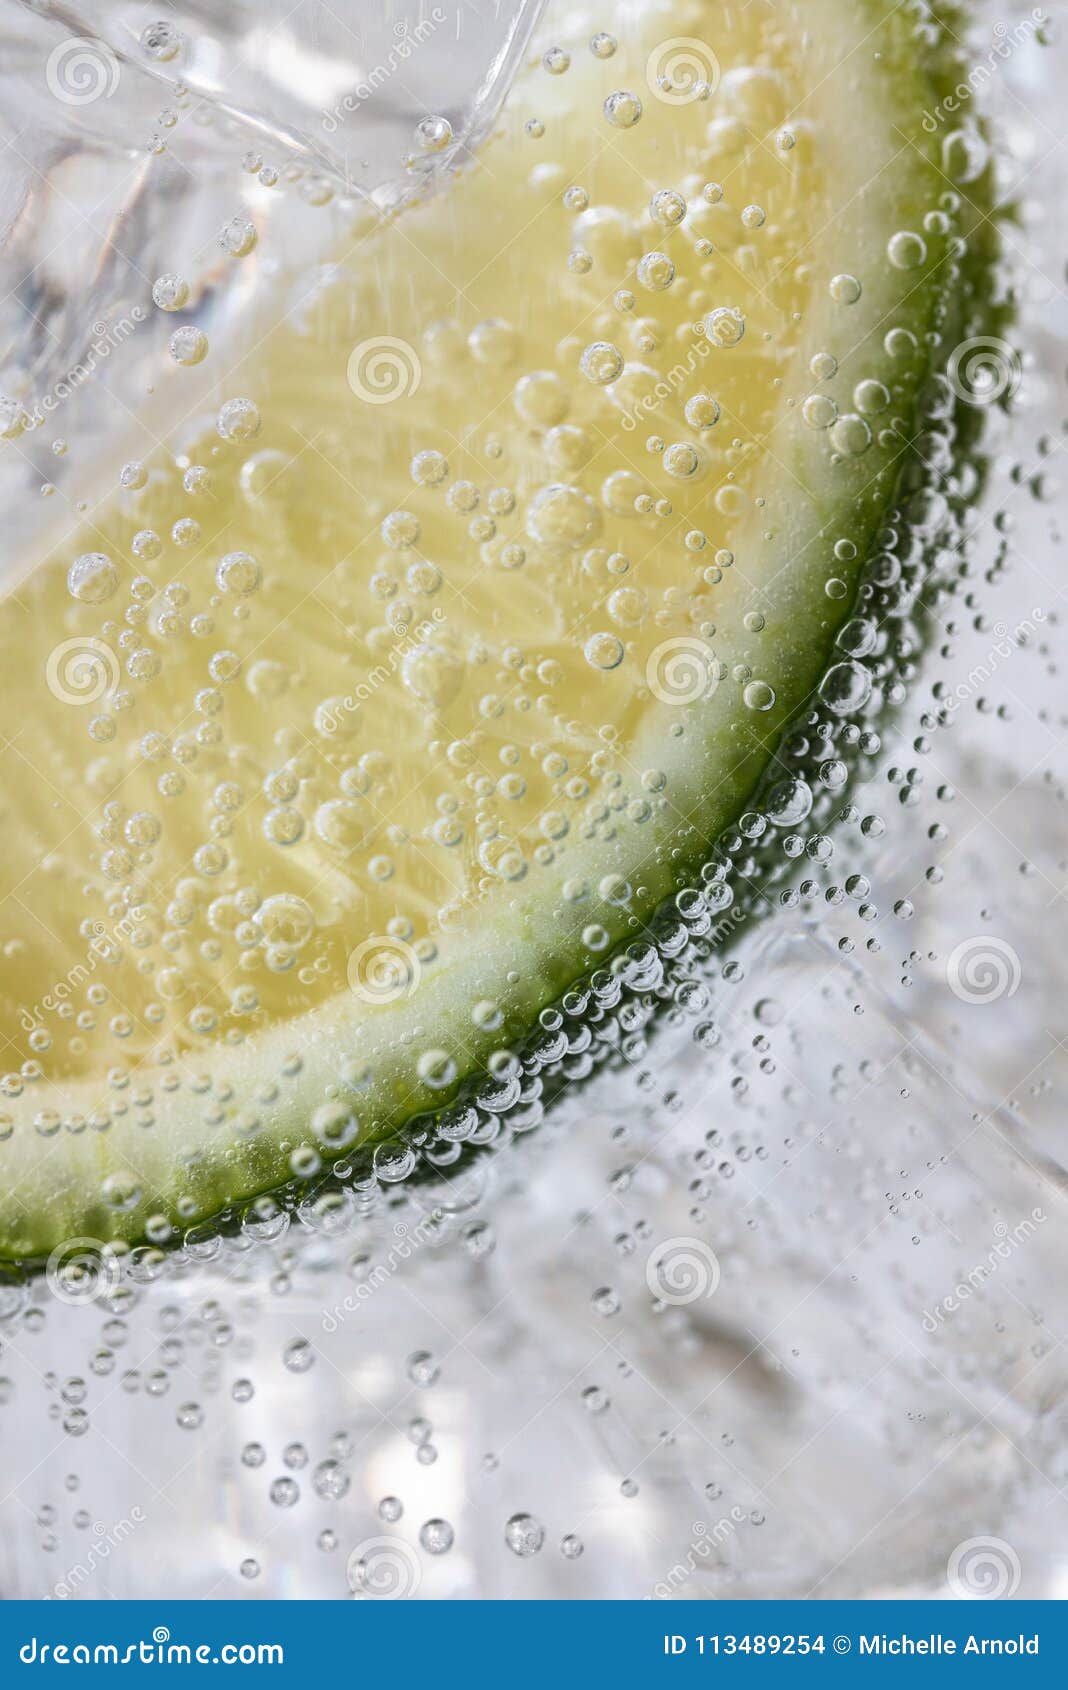 A Lime Wedge in Tonic Water Stock Photo - Image of beverage, slice ...